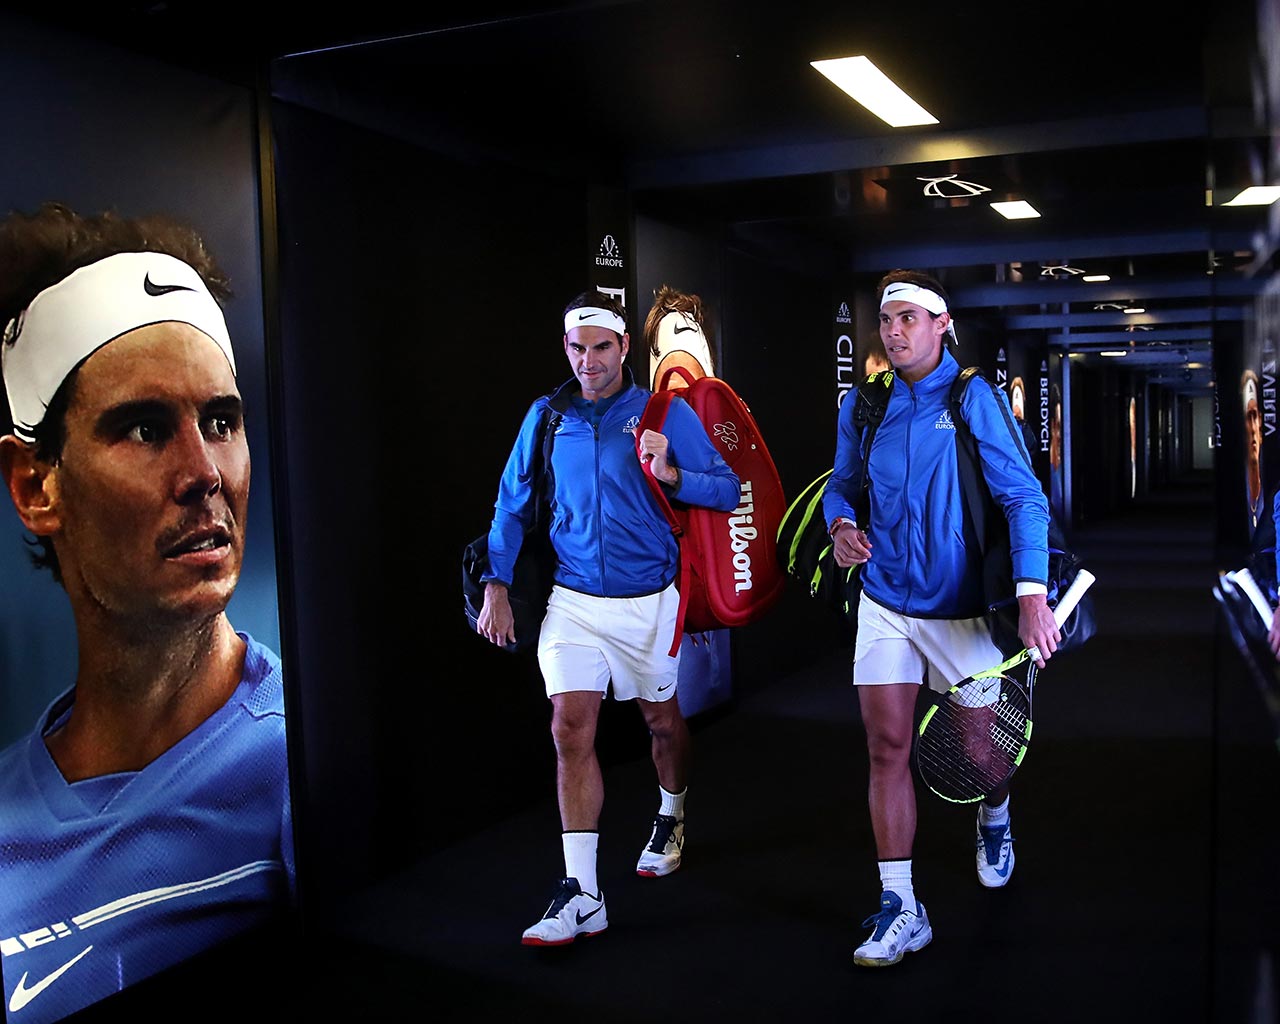 Federer / Nadal v Querrey / Sock - Match 8 Gallery | Photos | Laver Cup1280 x 1024